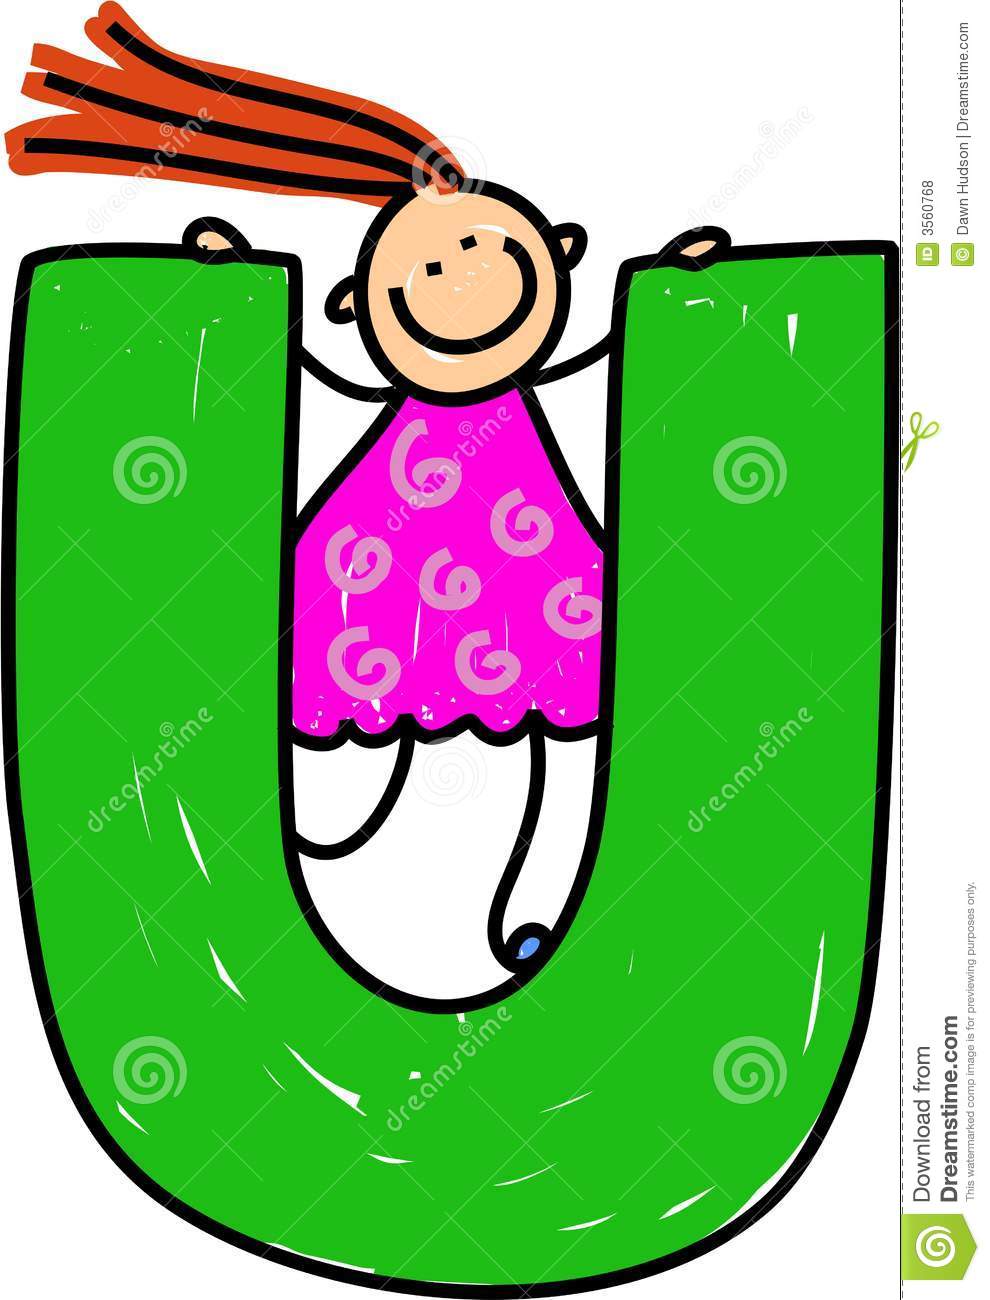 Climbing Over Giant Letter U Isolated On White   Toddler Art Series